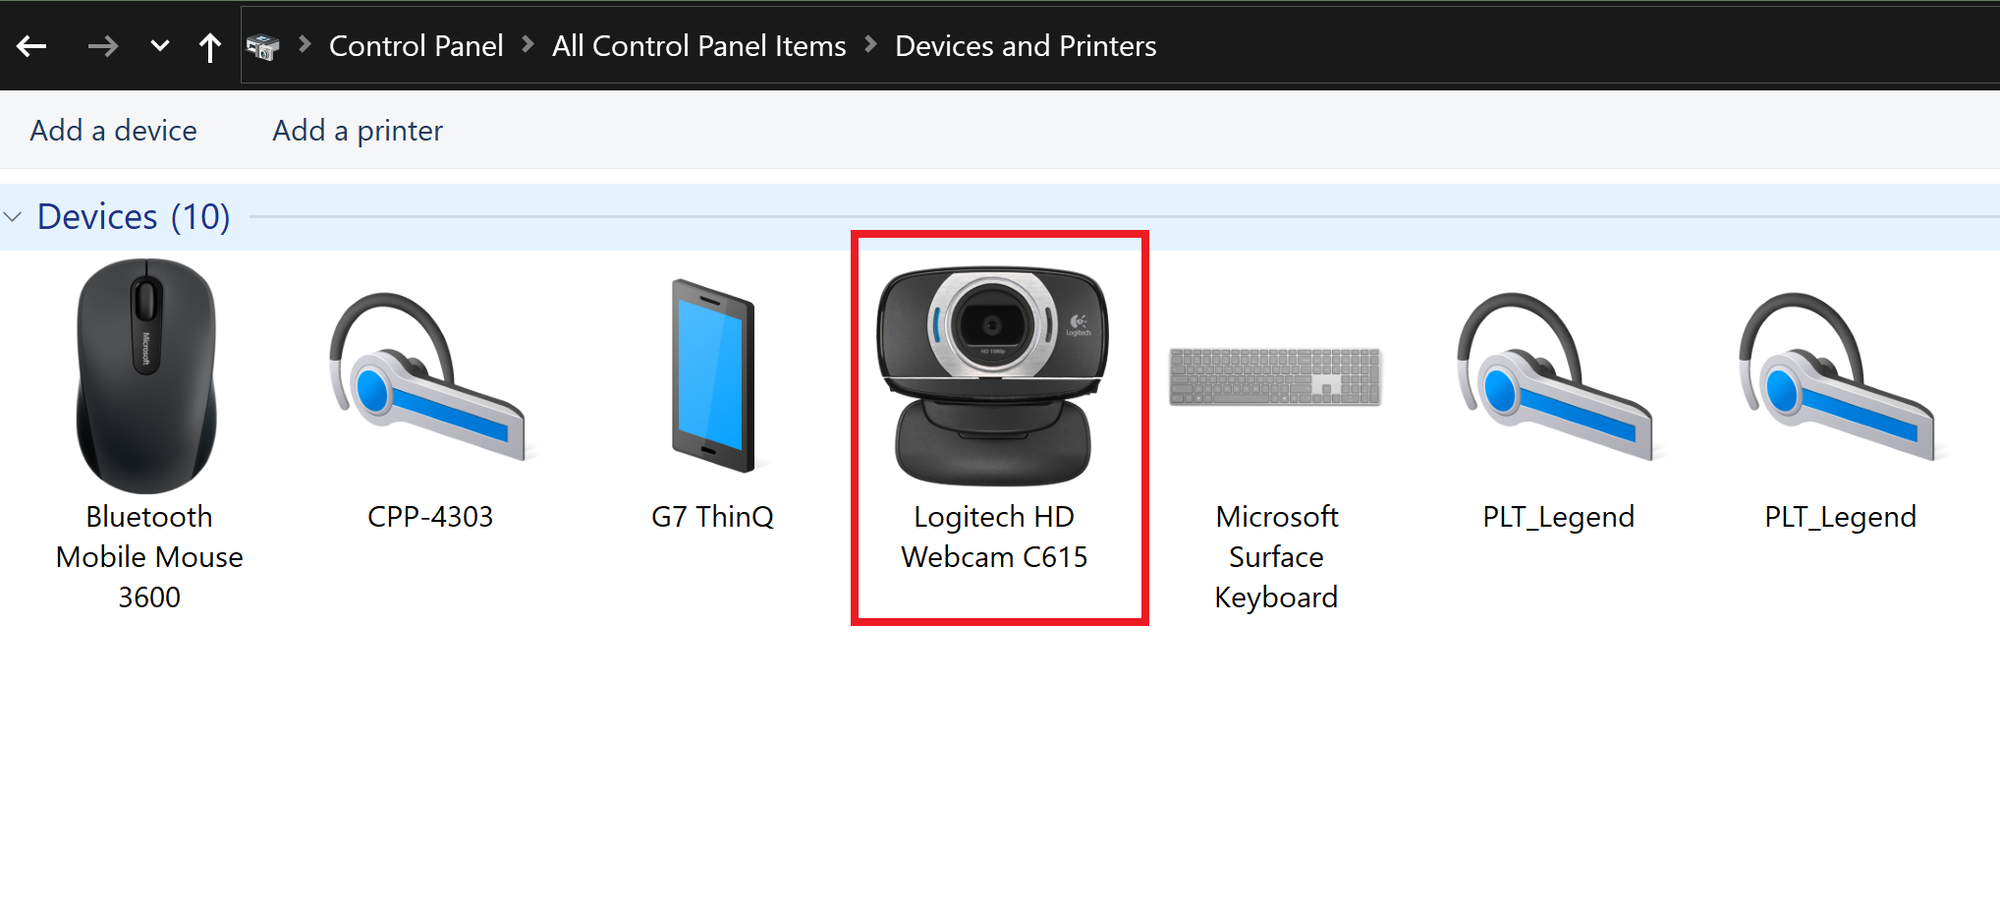 Logitech HD Webcam C615 Does Not Work with Surface Book 3 25f1ca66-9a12-4cce-8ebb-8c709ed2ad64?upload=true.png